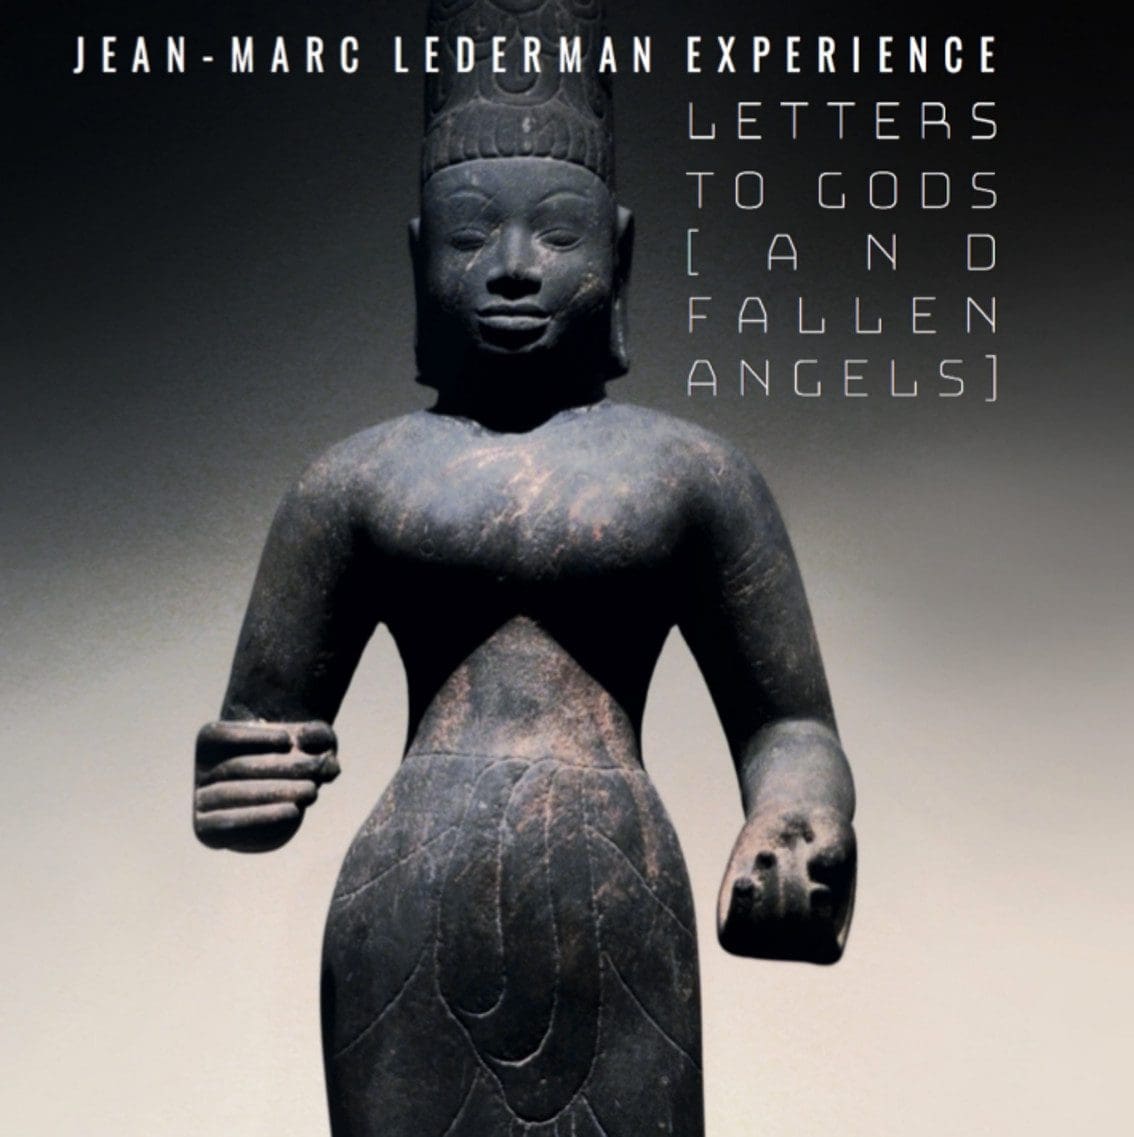 Collaborative album for Jean-Marc Lederman Experience: 'Letters To Gods (and fallen angels)' incl. a massive list of vocalists